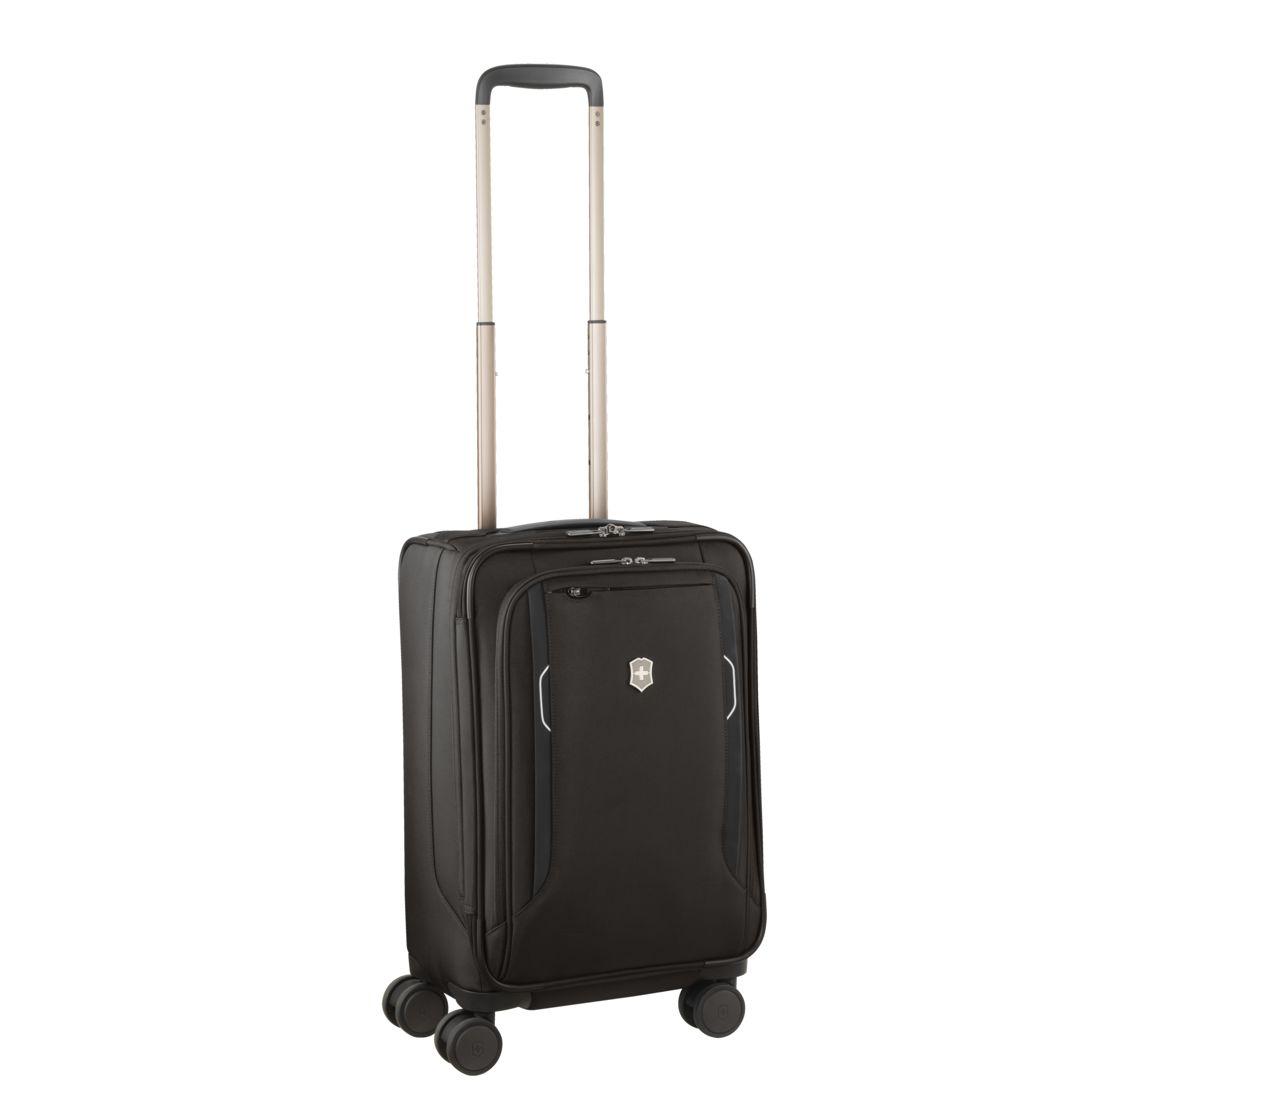 Werks Traveler 6.0 Softside Frequent Flyer Carry-On-607259